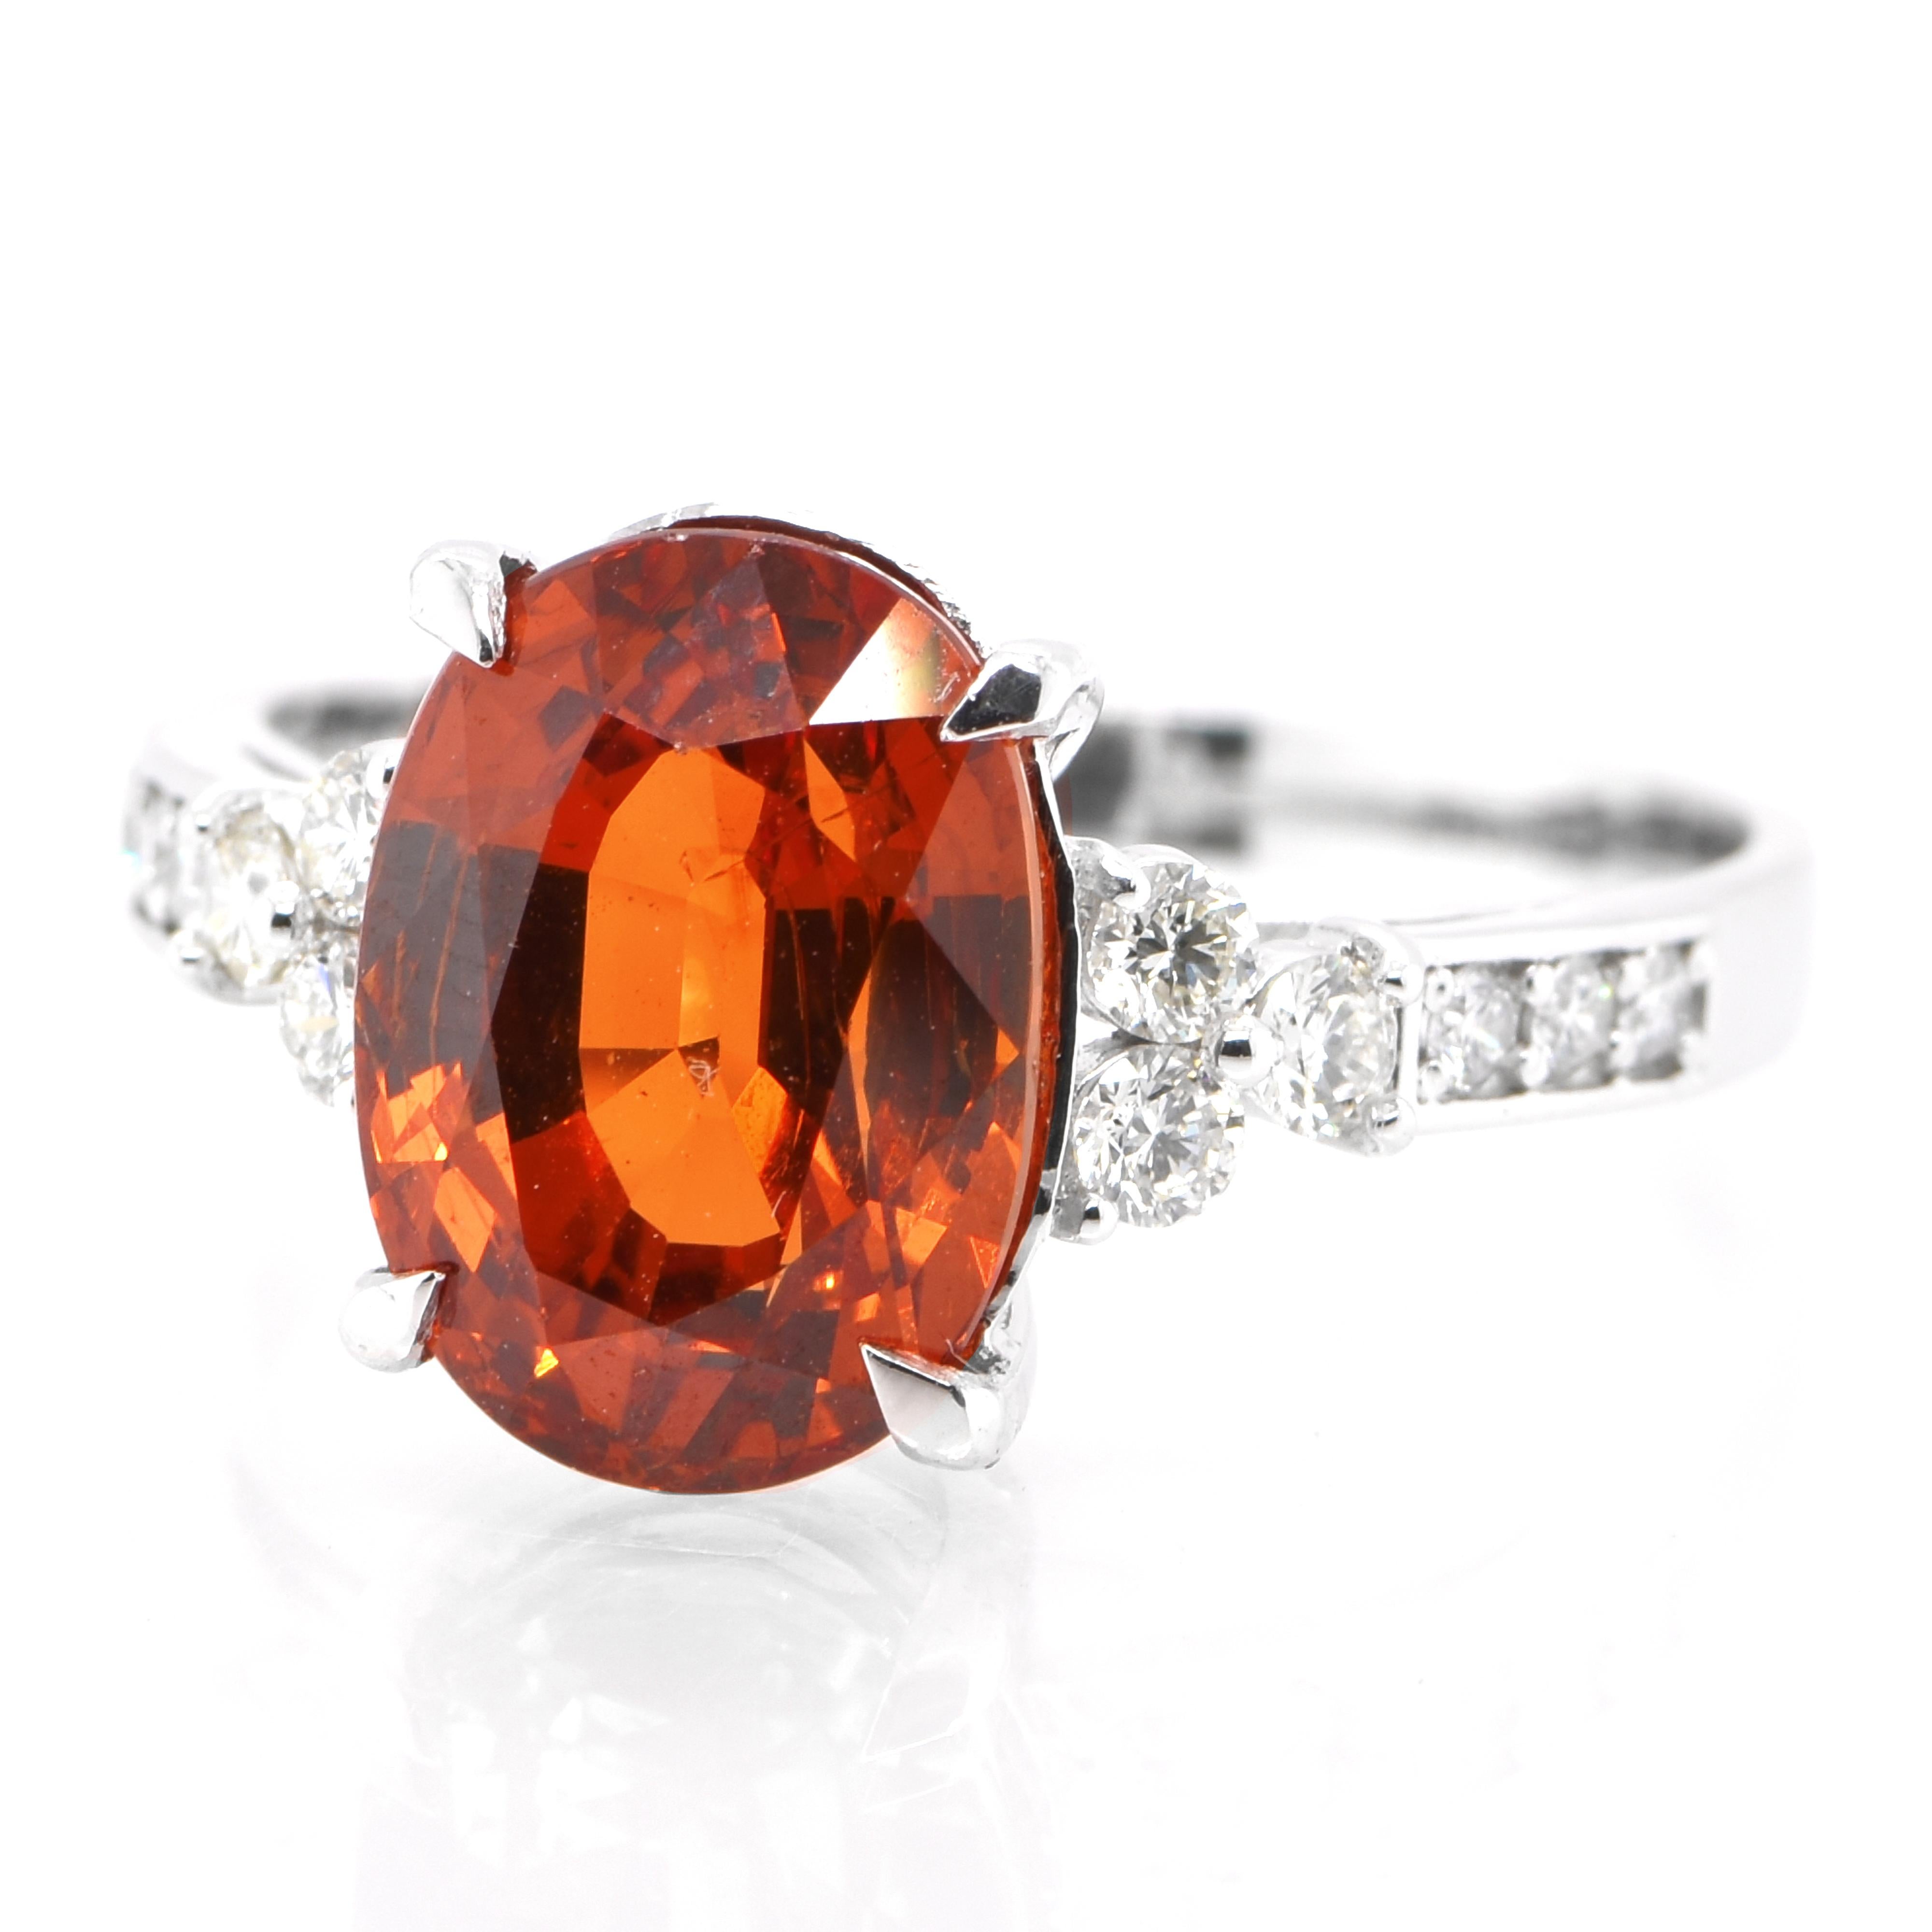 An absolutely gorgeous Cocktail Ring featuring a 4.78 Carat, Natural Spessartine Garnet and 0.25 Carats of Diamond Accents set in Platinum. Garnets have been adorned by humans throughout history from Ancient Egypt, Rome and Greece. They come in a